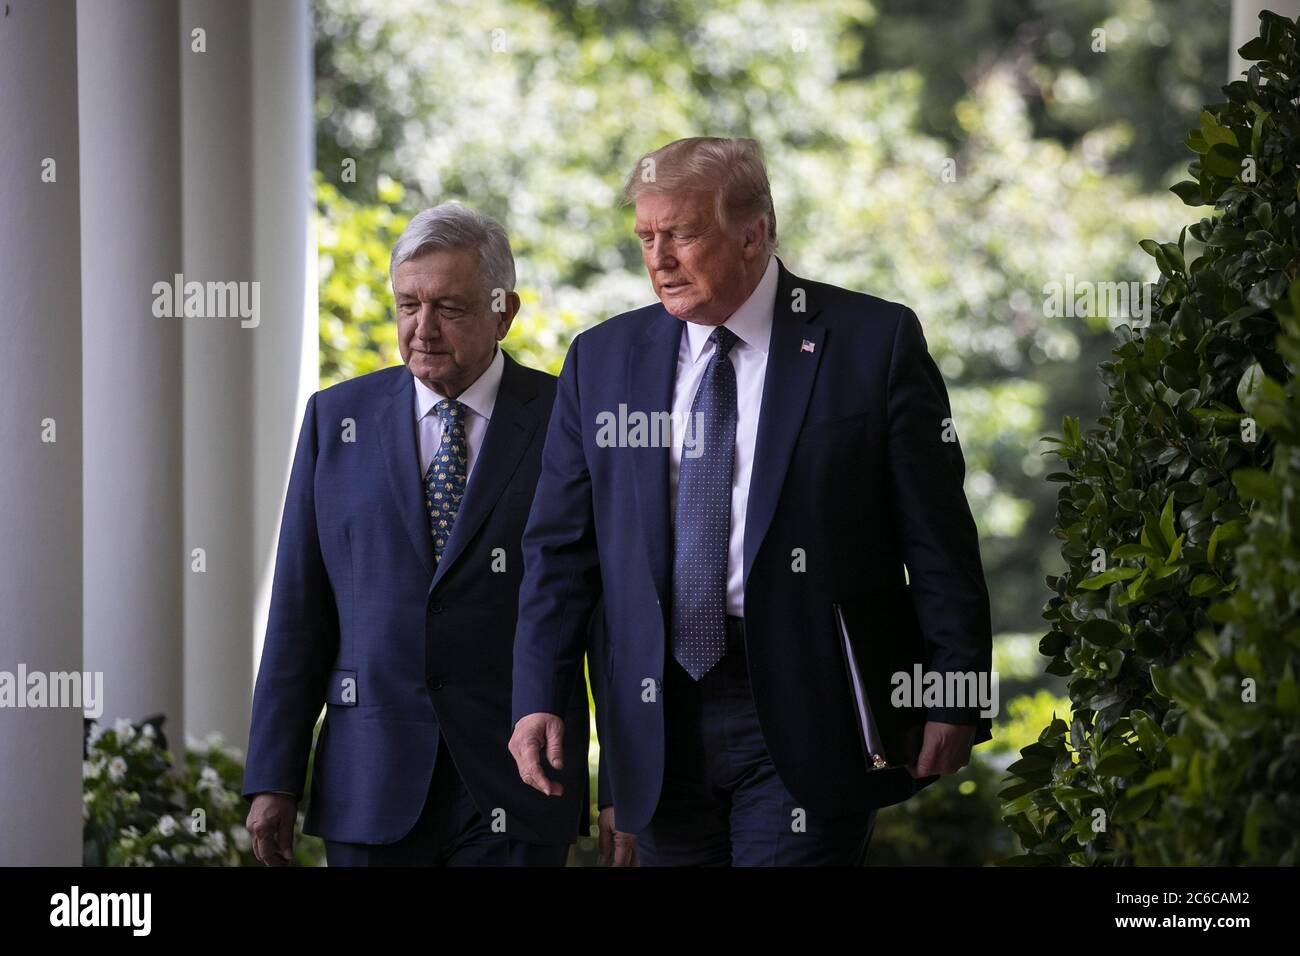 Washington, United States. 08th July, 2020. President Donald Trump, right, and Andres Manuel Lopez Obrador, Mexico's president, arrive to a signing ceremony in the Rose Garden of the White House in Washington, DC, on Wednesday, July 8, 2020. Photo by Al Drago/UPI Credit: UPI/Alamy Live News Stock Photo